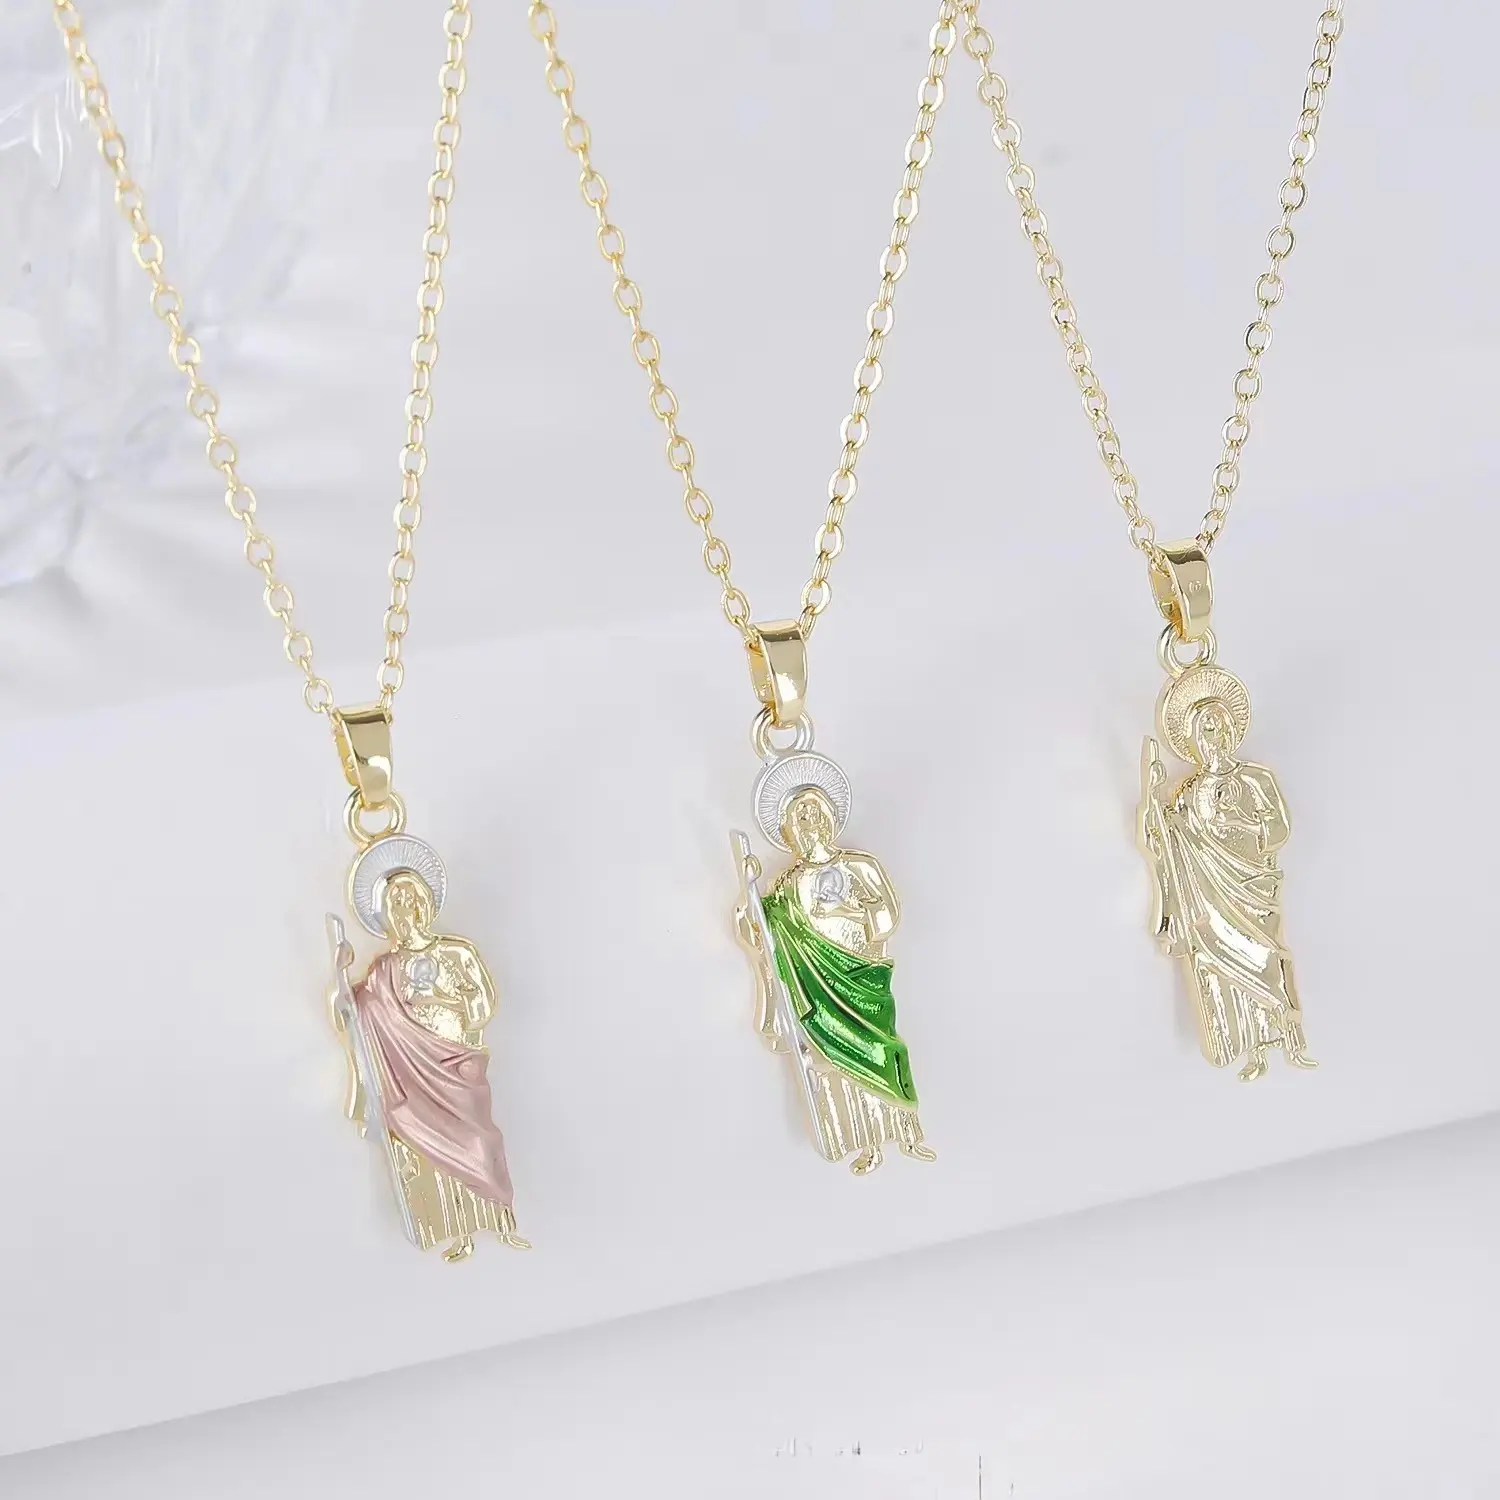 Trendy Personality Religious Men's and Women's Necklace Copper Plated Gold Dropping Oil Virgin Mary Pendant Necklace